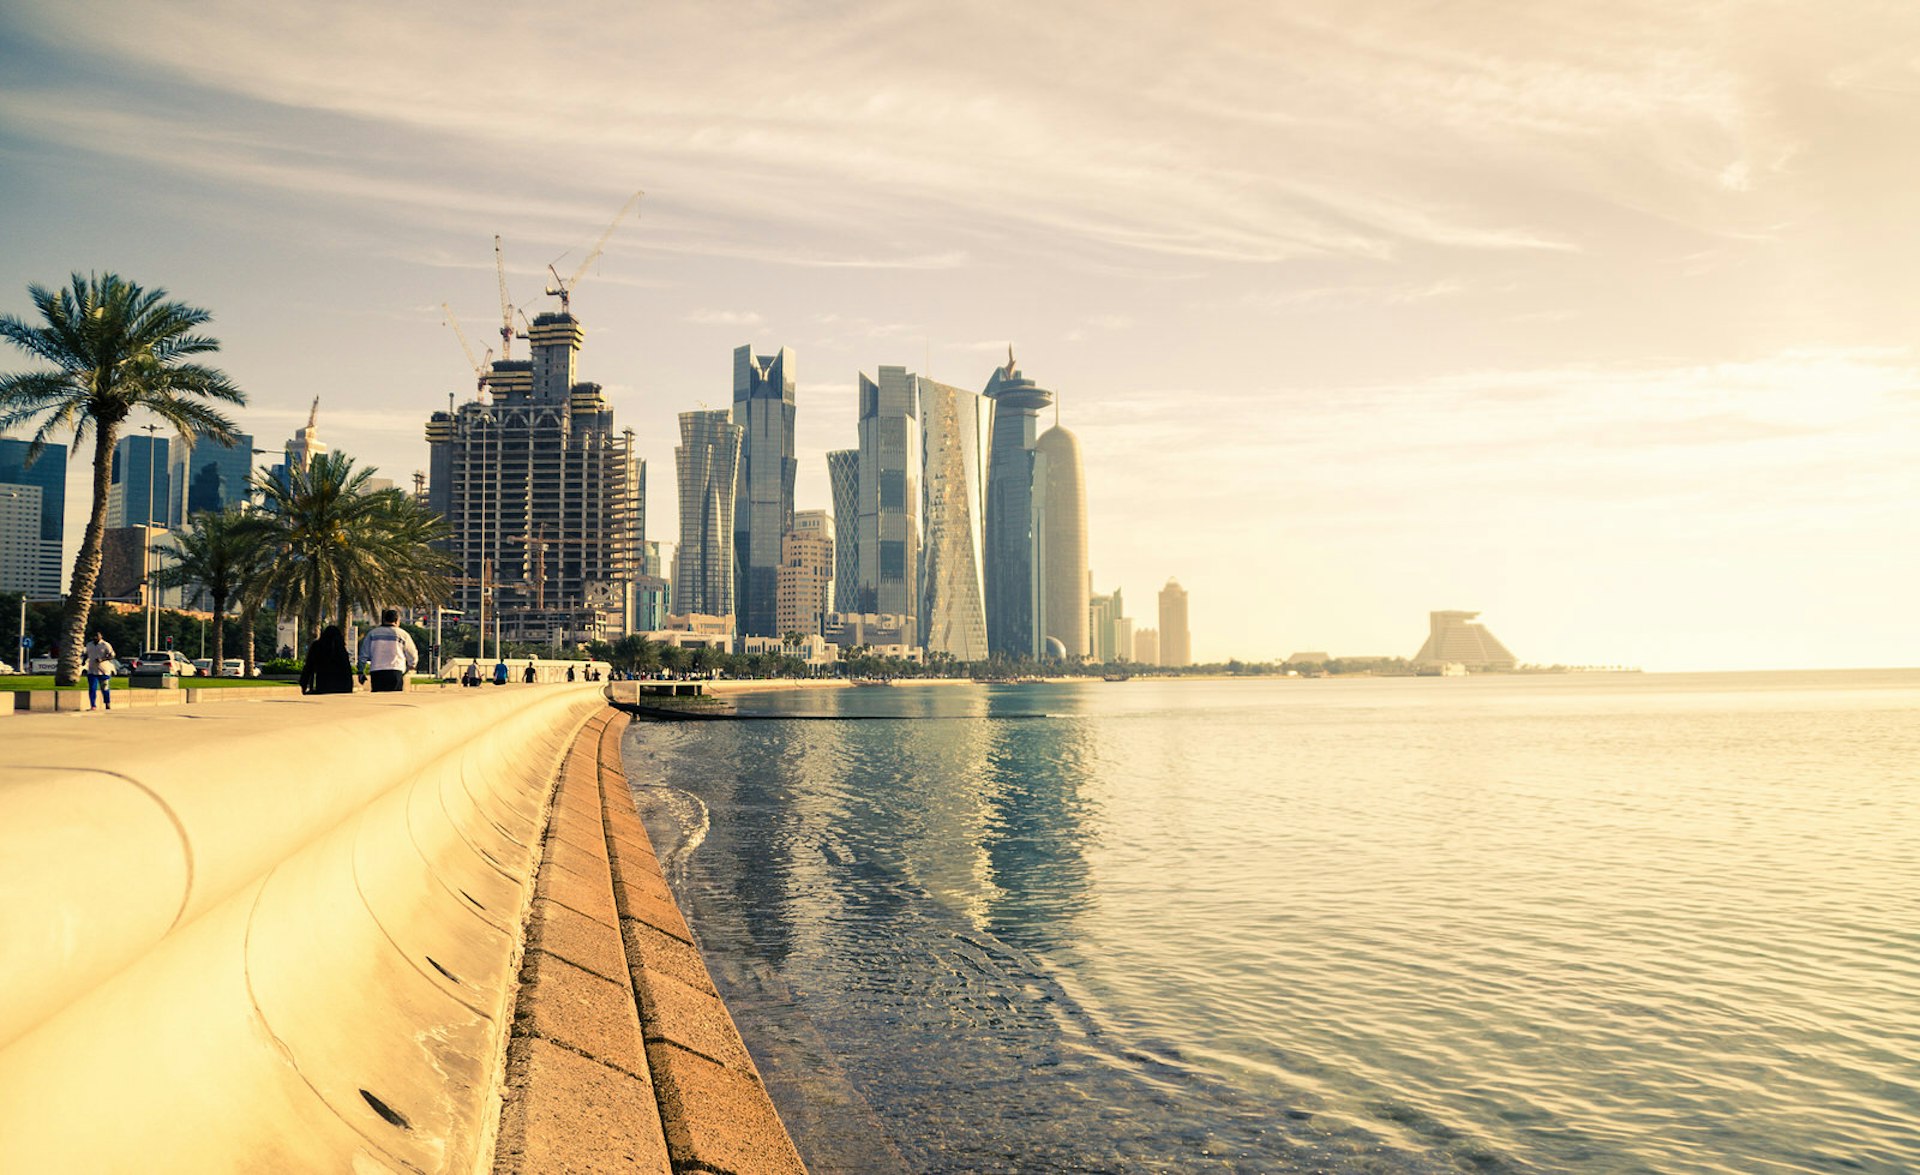 The skyline of the modern and high-rising city of Doha in Qatar, Middle East. Image by Fitria Ramli / Shutterstock